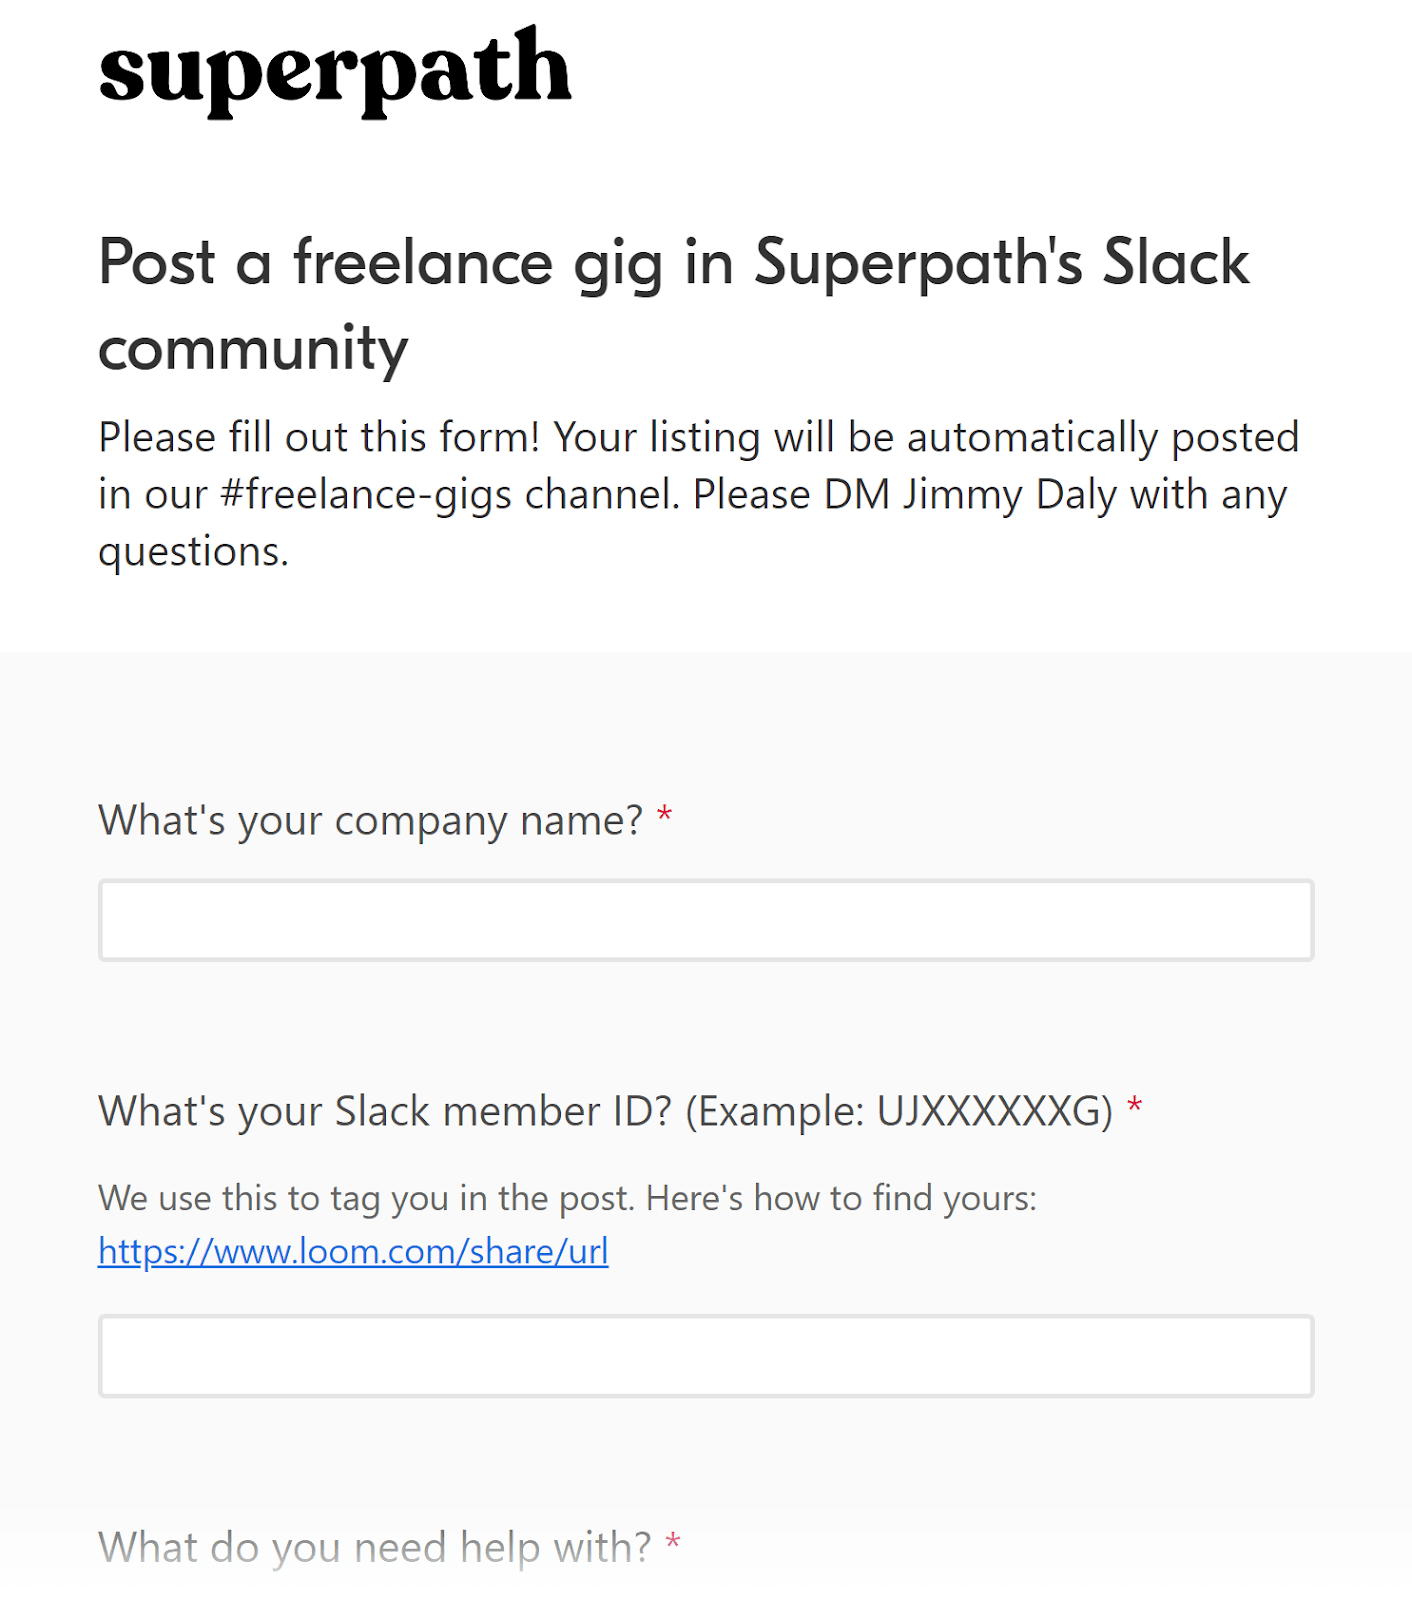 A section of Superpath's form for posting a freelance gig in Superpath's Slack community